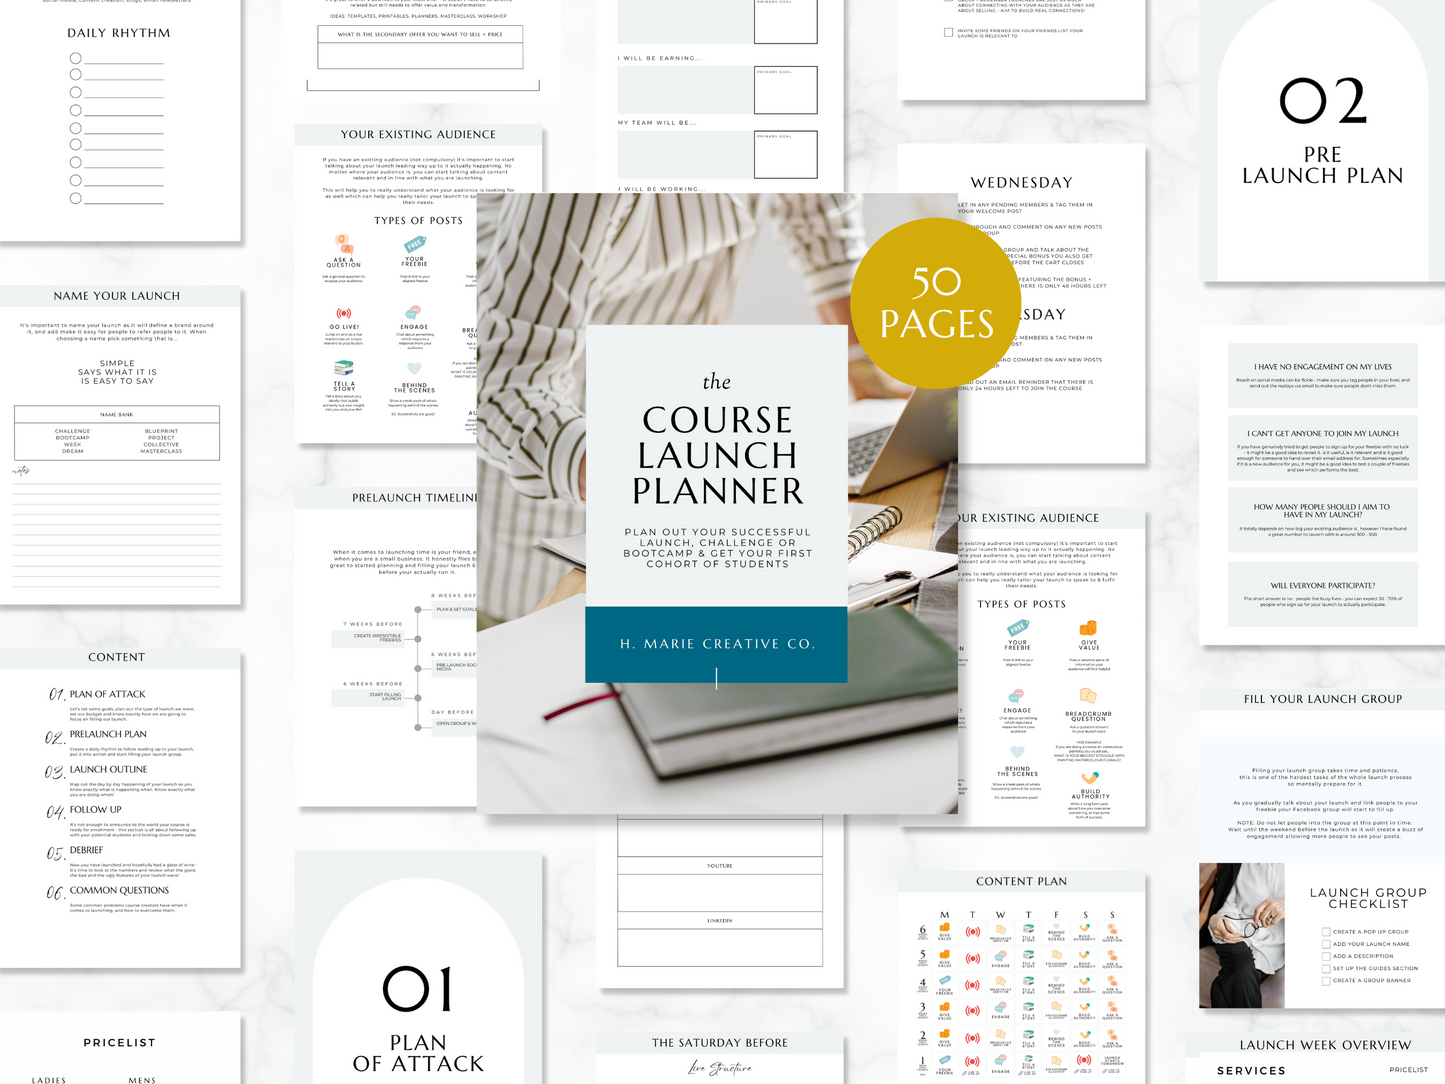 The Course Launch Planner